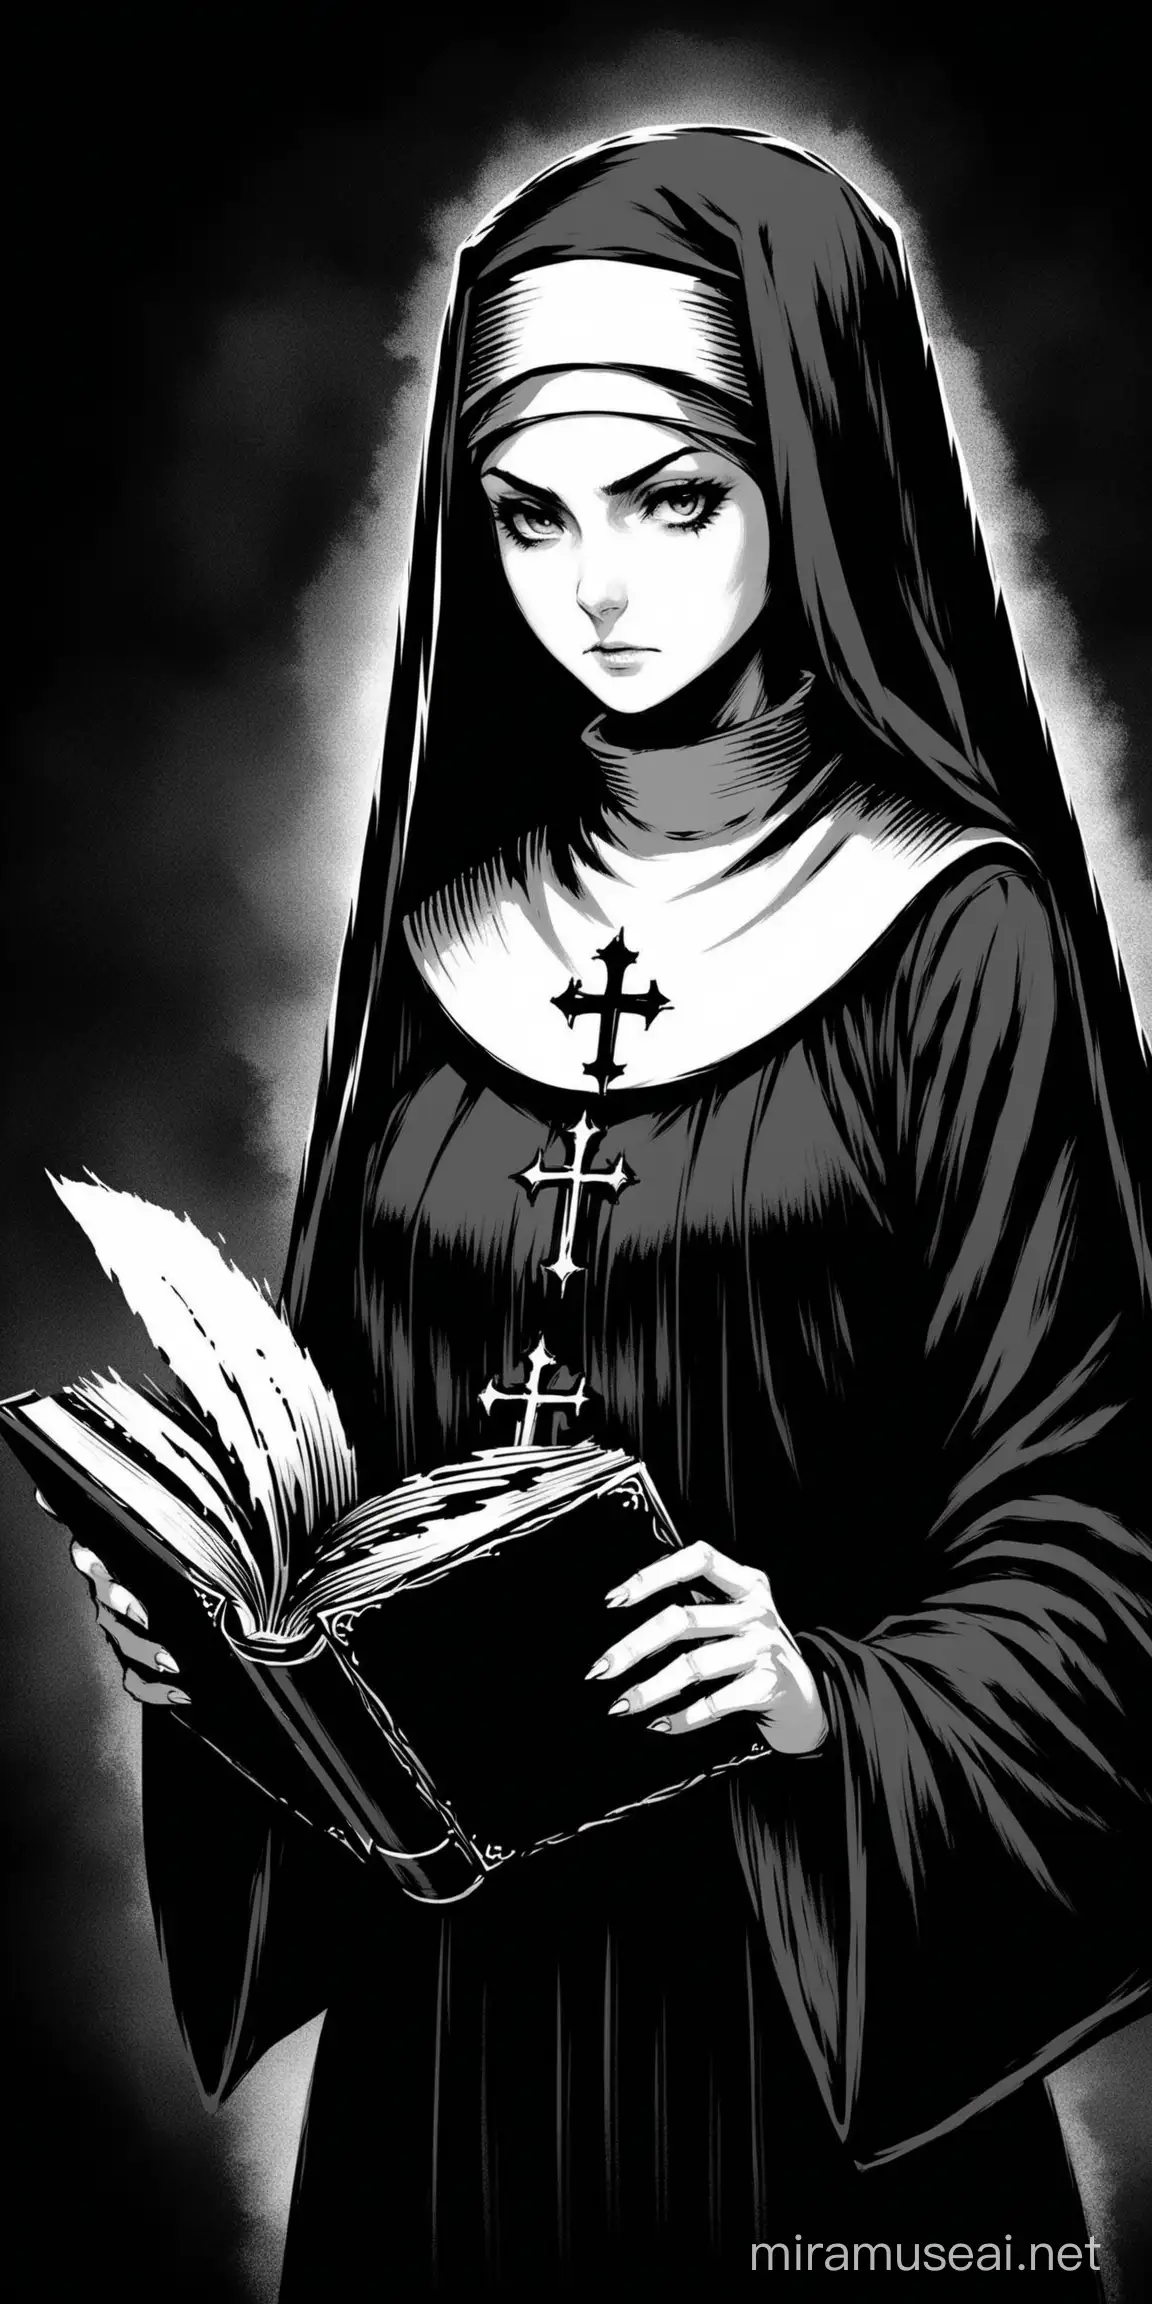 Serious Nun Holding Book in Monochrome Ink Painting Style